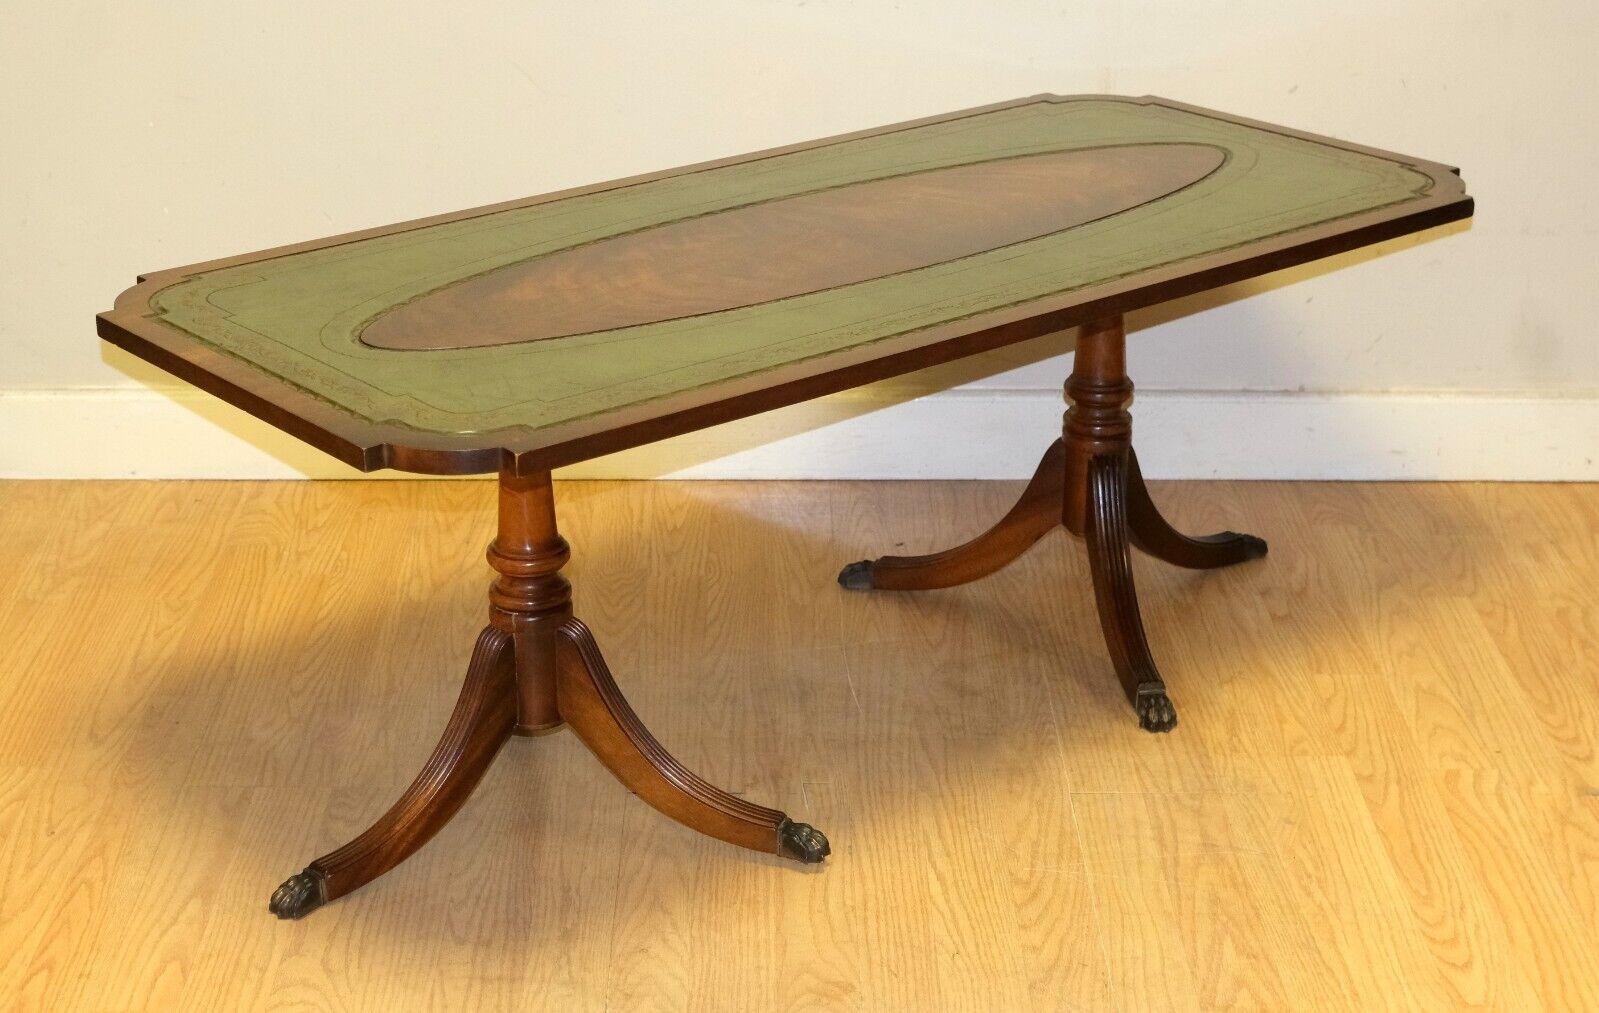 We are delighted to offer for sale this elegant Bevan Funnell green leather top brown mahogany coffee table. 

A very well made and elegant coffee table from the well known, British furniture makers, Bevan Funnell. The leather top and the gold